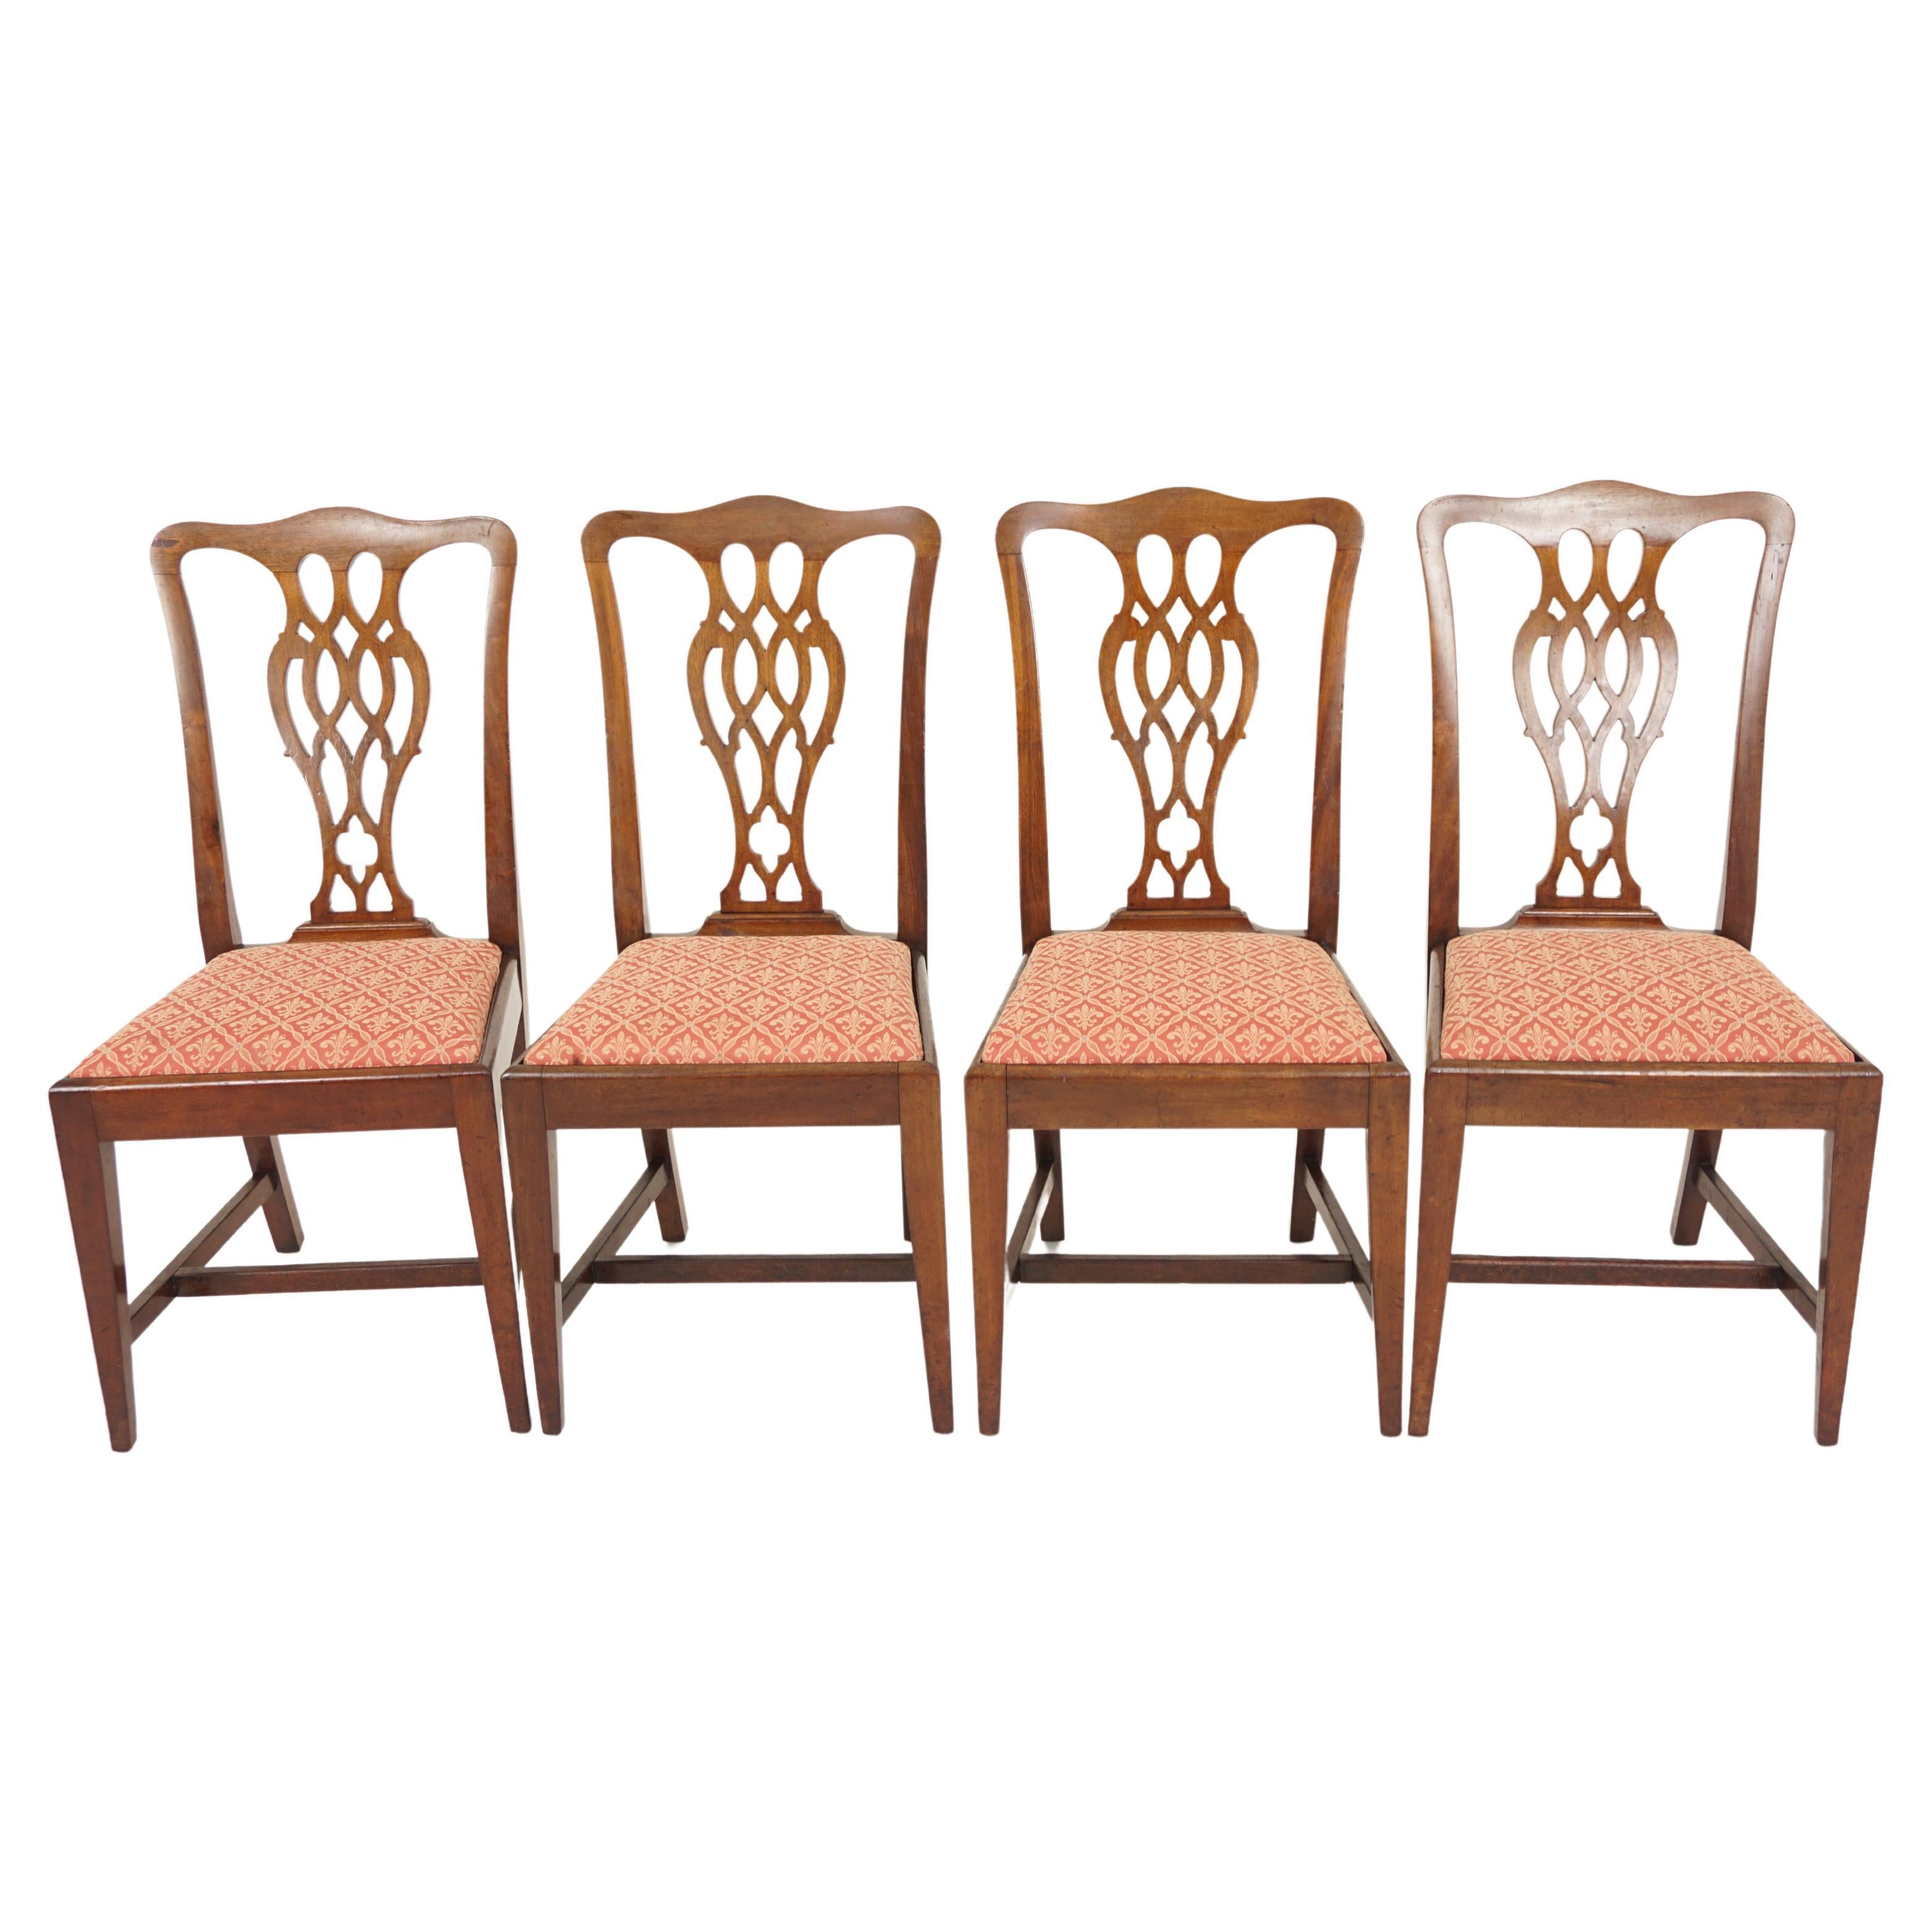 Set of Four Quality Chippendale Style Walnut Dining Chairs, Scotland 1920, H759